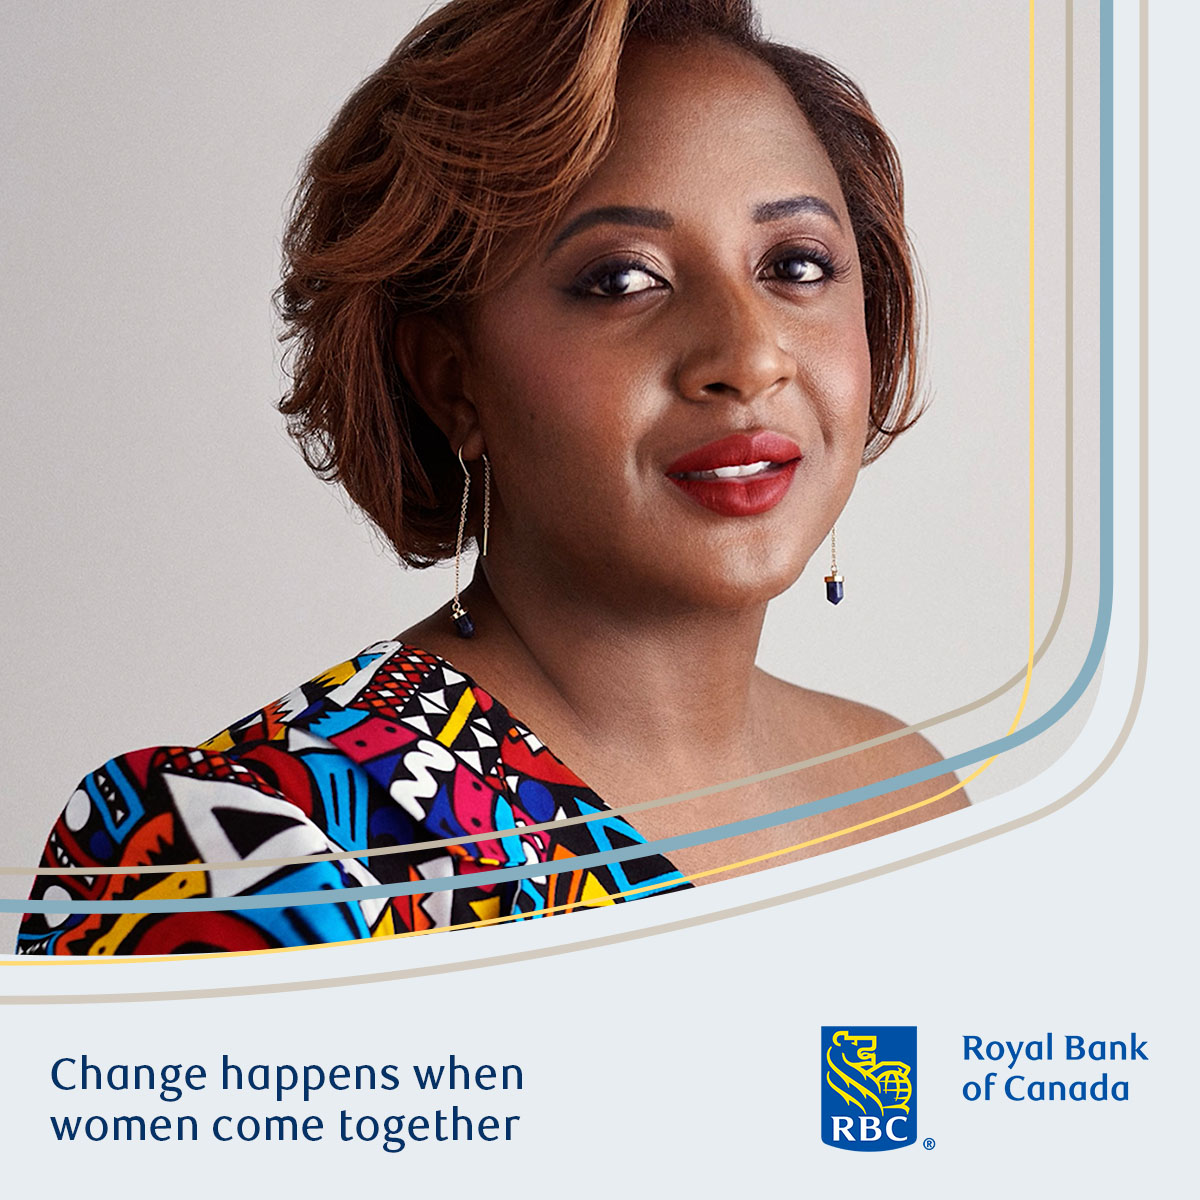 By working with @the_female_lead, we enable women to be the voice of change. Find out more here: read.rbcwm.com/3VFdkcR